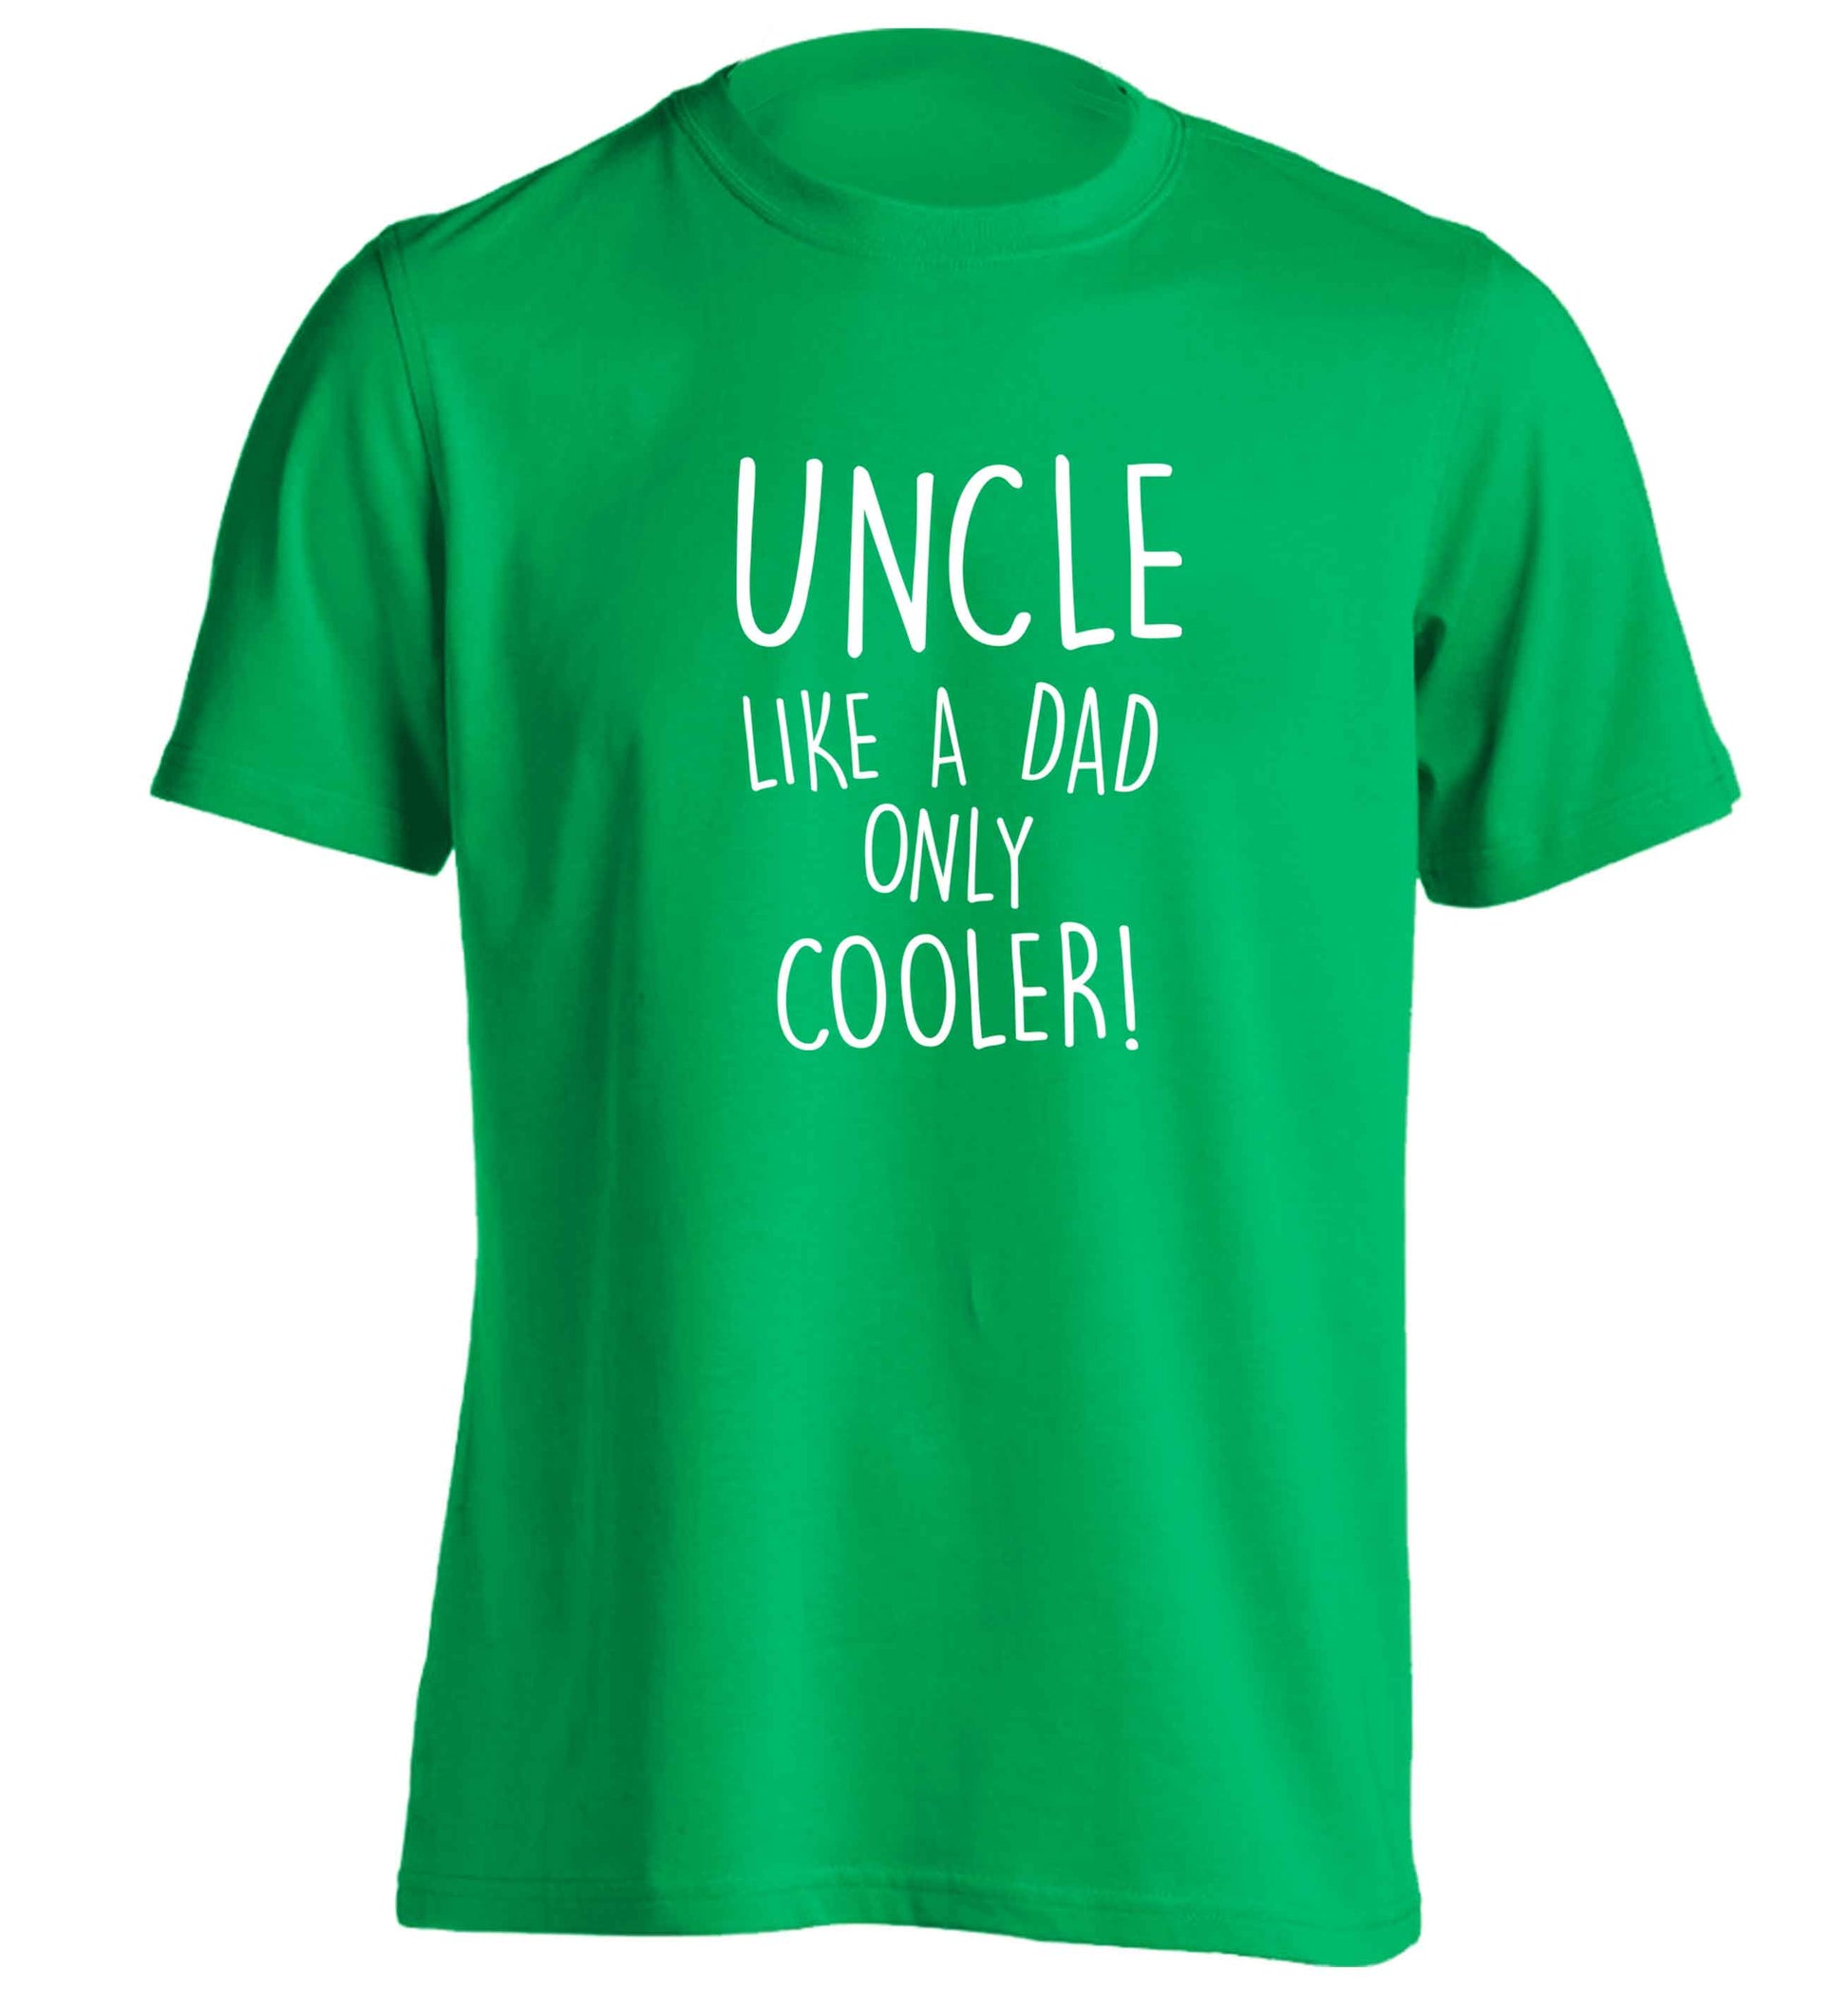 Uncle like a dad only cooler adults unisex green Tshirt 2XL